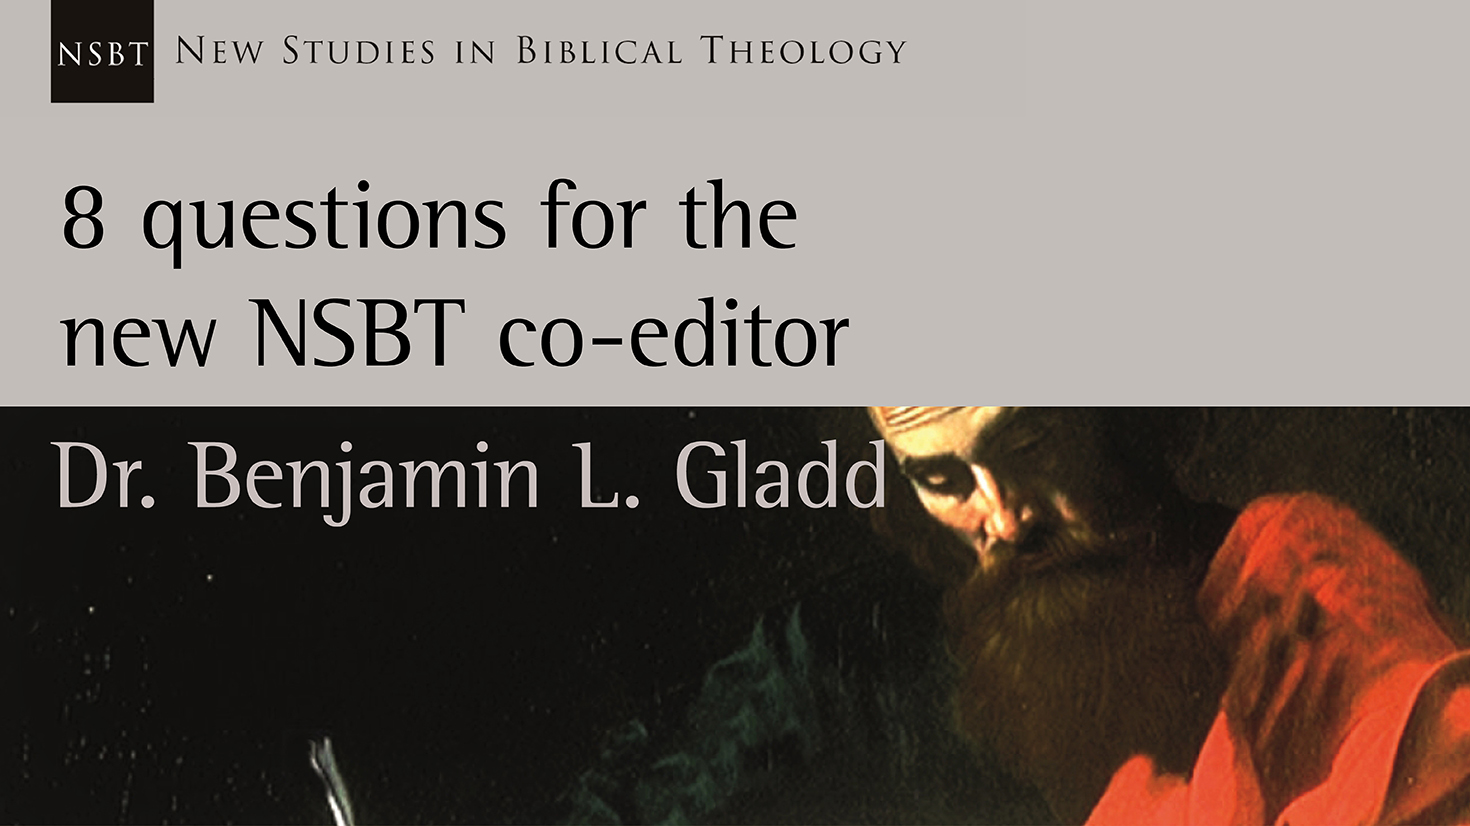 8 Questions for the new NSBT Co-editor - Dr. Benjamin L. Gladd